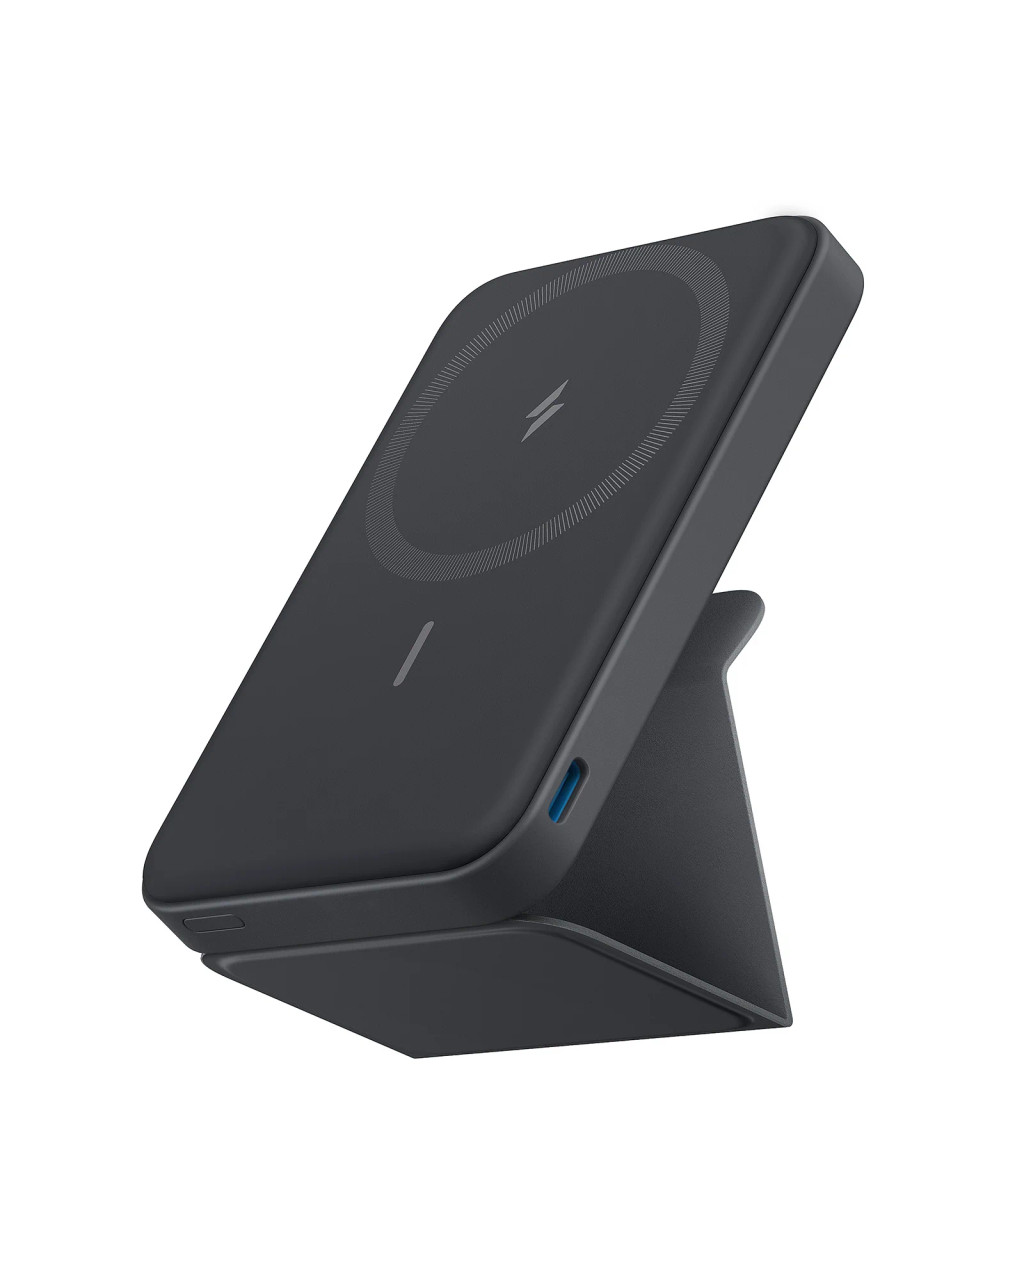 Anker 622 PowerCore Magnetic 5000mAh Power Bank with Foldable